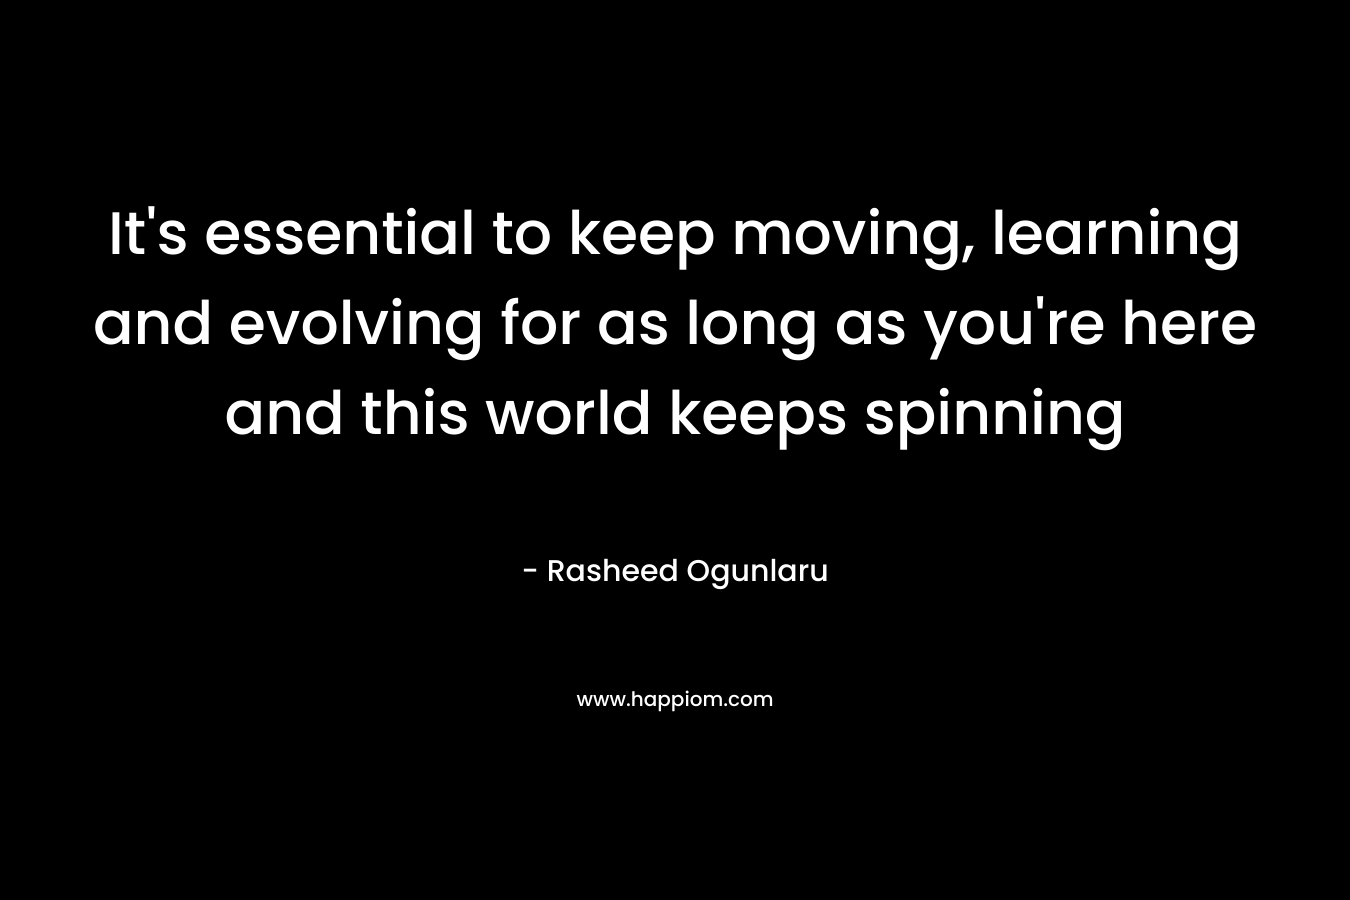 It’s essential to keep moving, learning and evolving for as long as you’re here and this world keeps spinning – Rasheed Ogunlaru